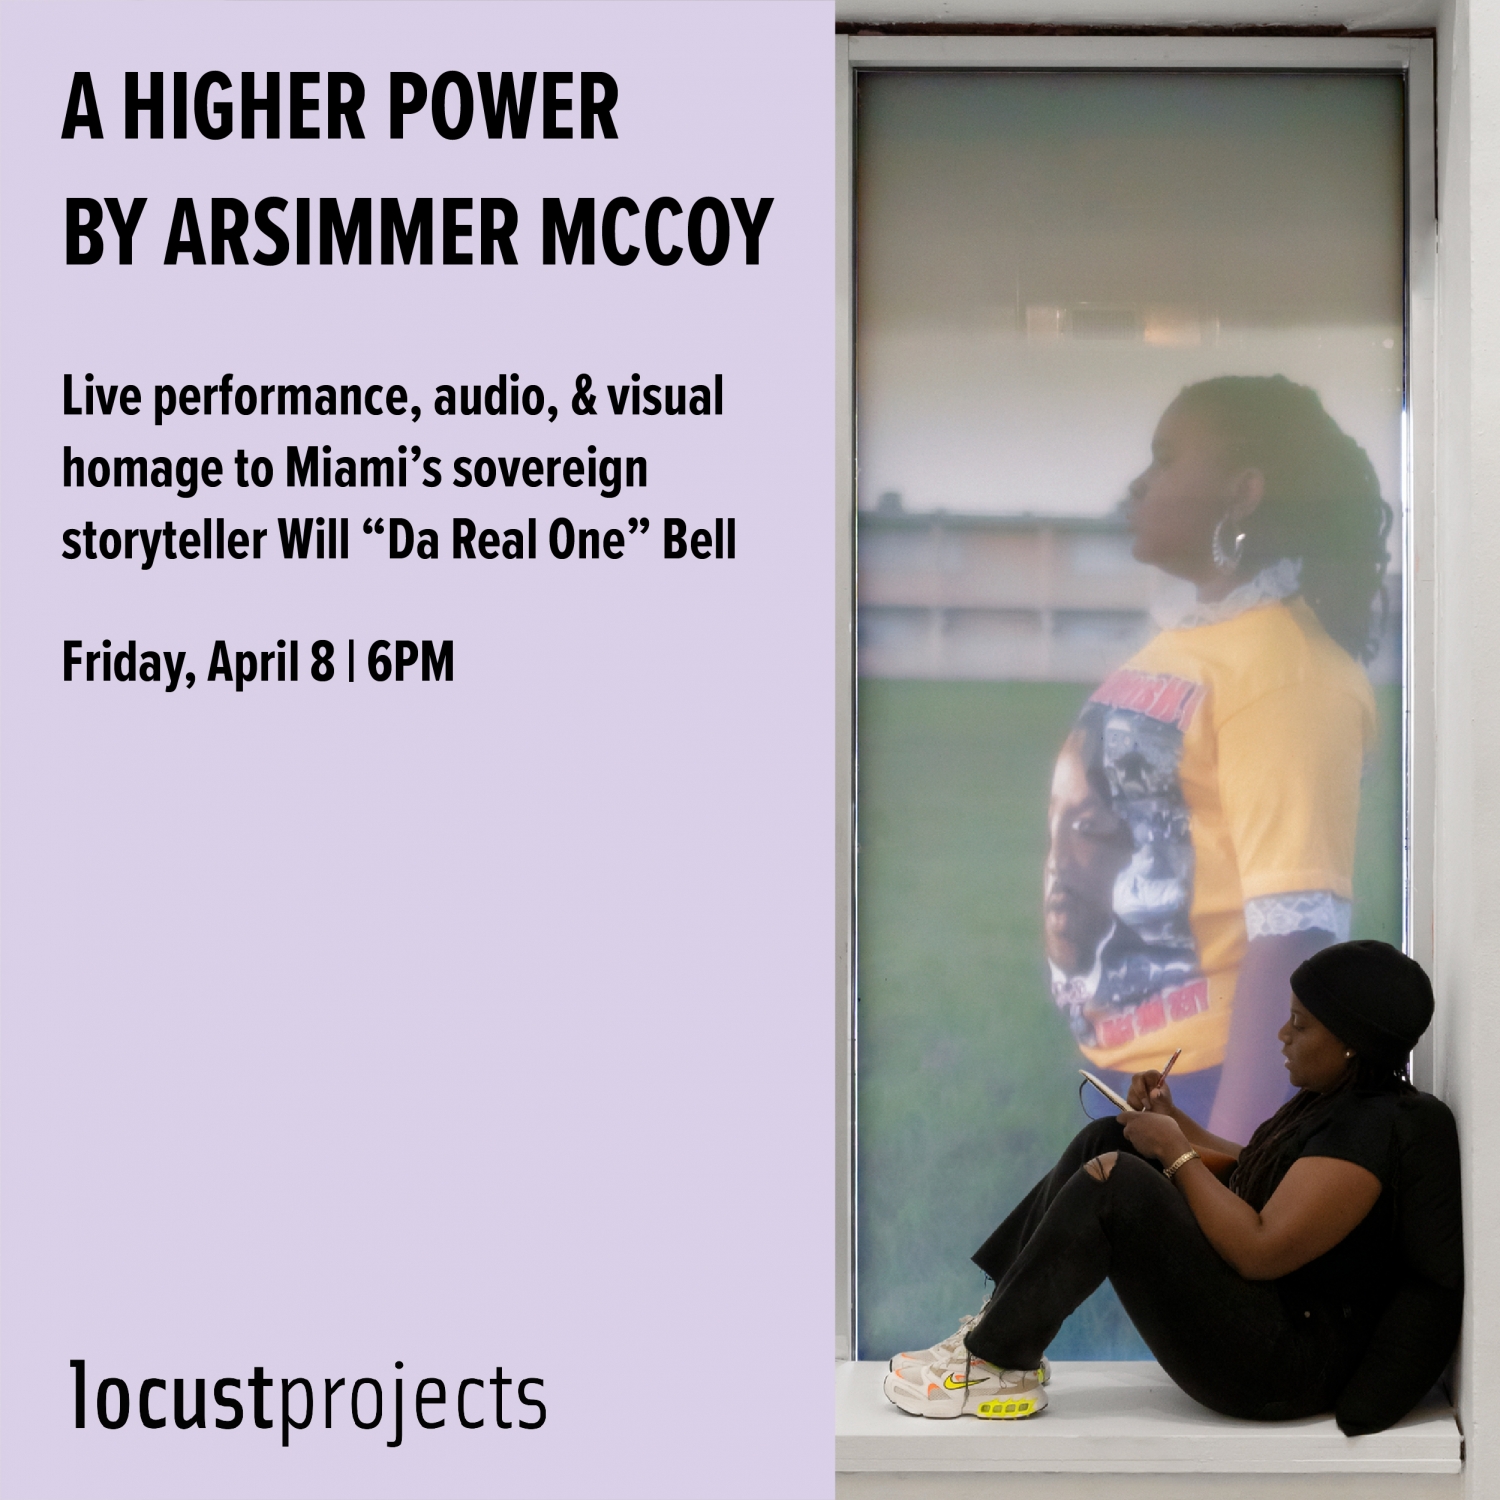 SIRG Closing Program: A Higher Power hosted by Arsimmer McCoy